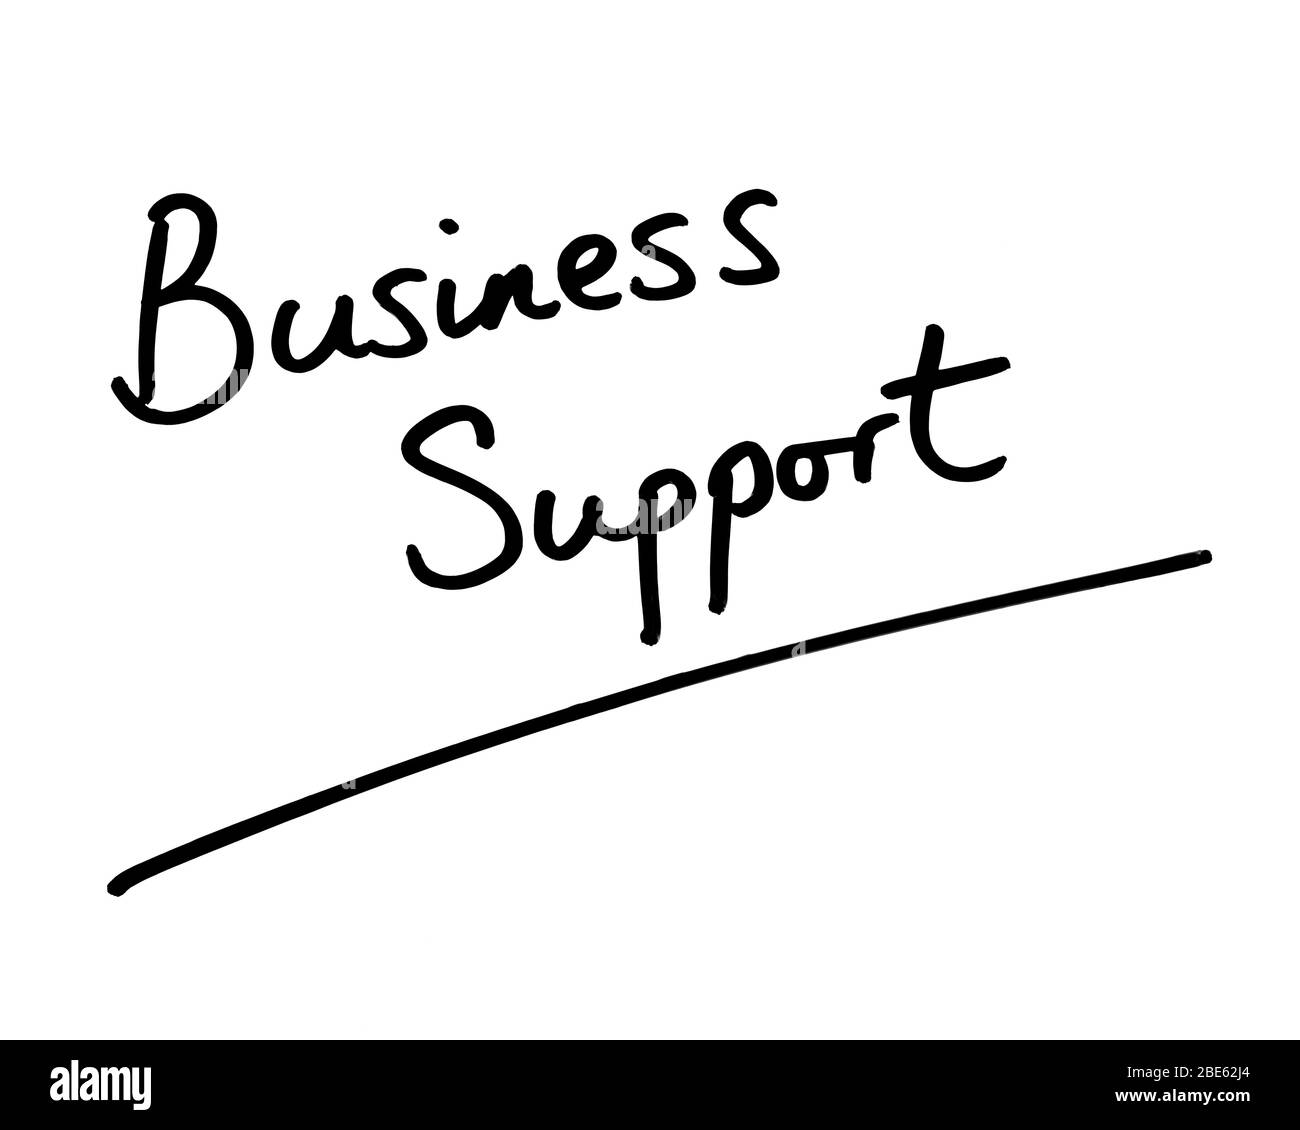 Business Support handwritten on a white background. Stock Photo